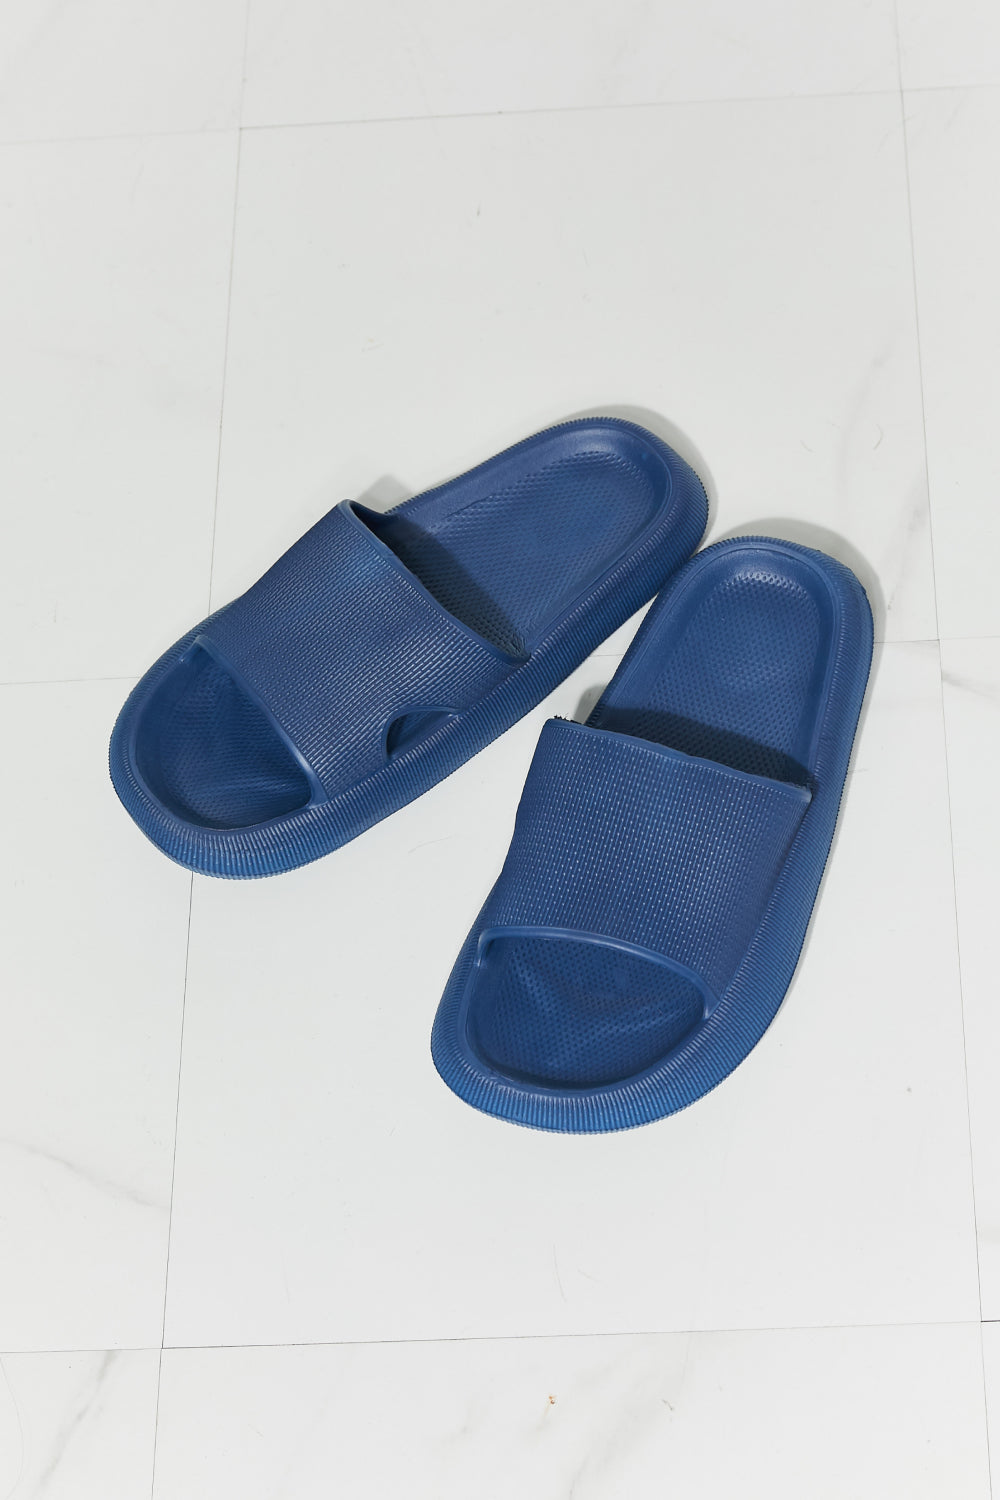 MMShoes Arms Around Me Open Toe Slide in Navy - Shop All Around Divas